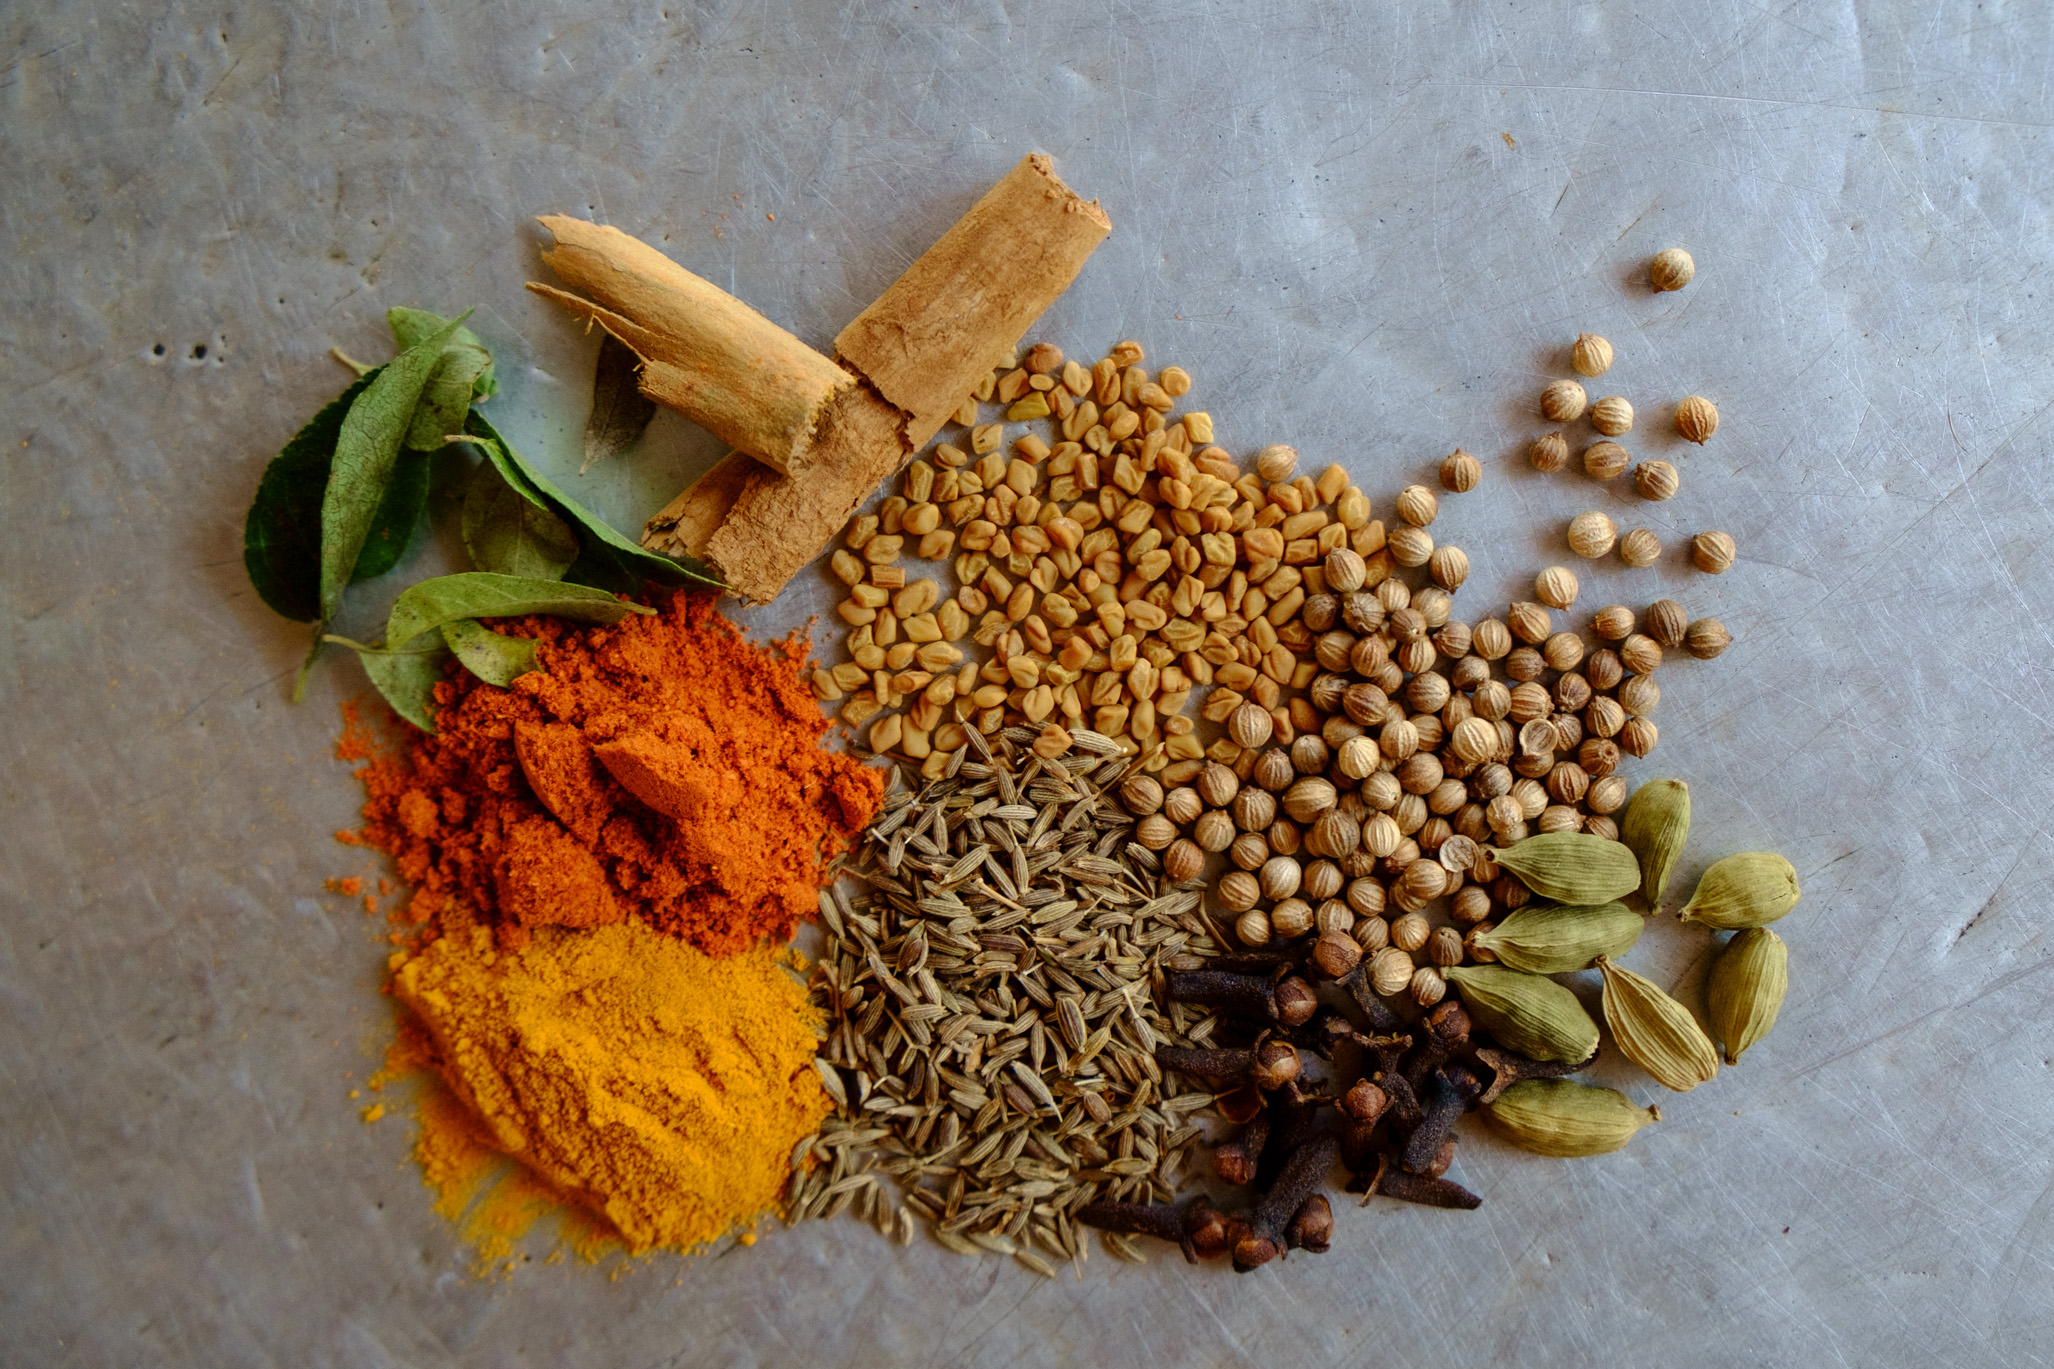 Ingredients for a good curry